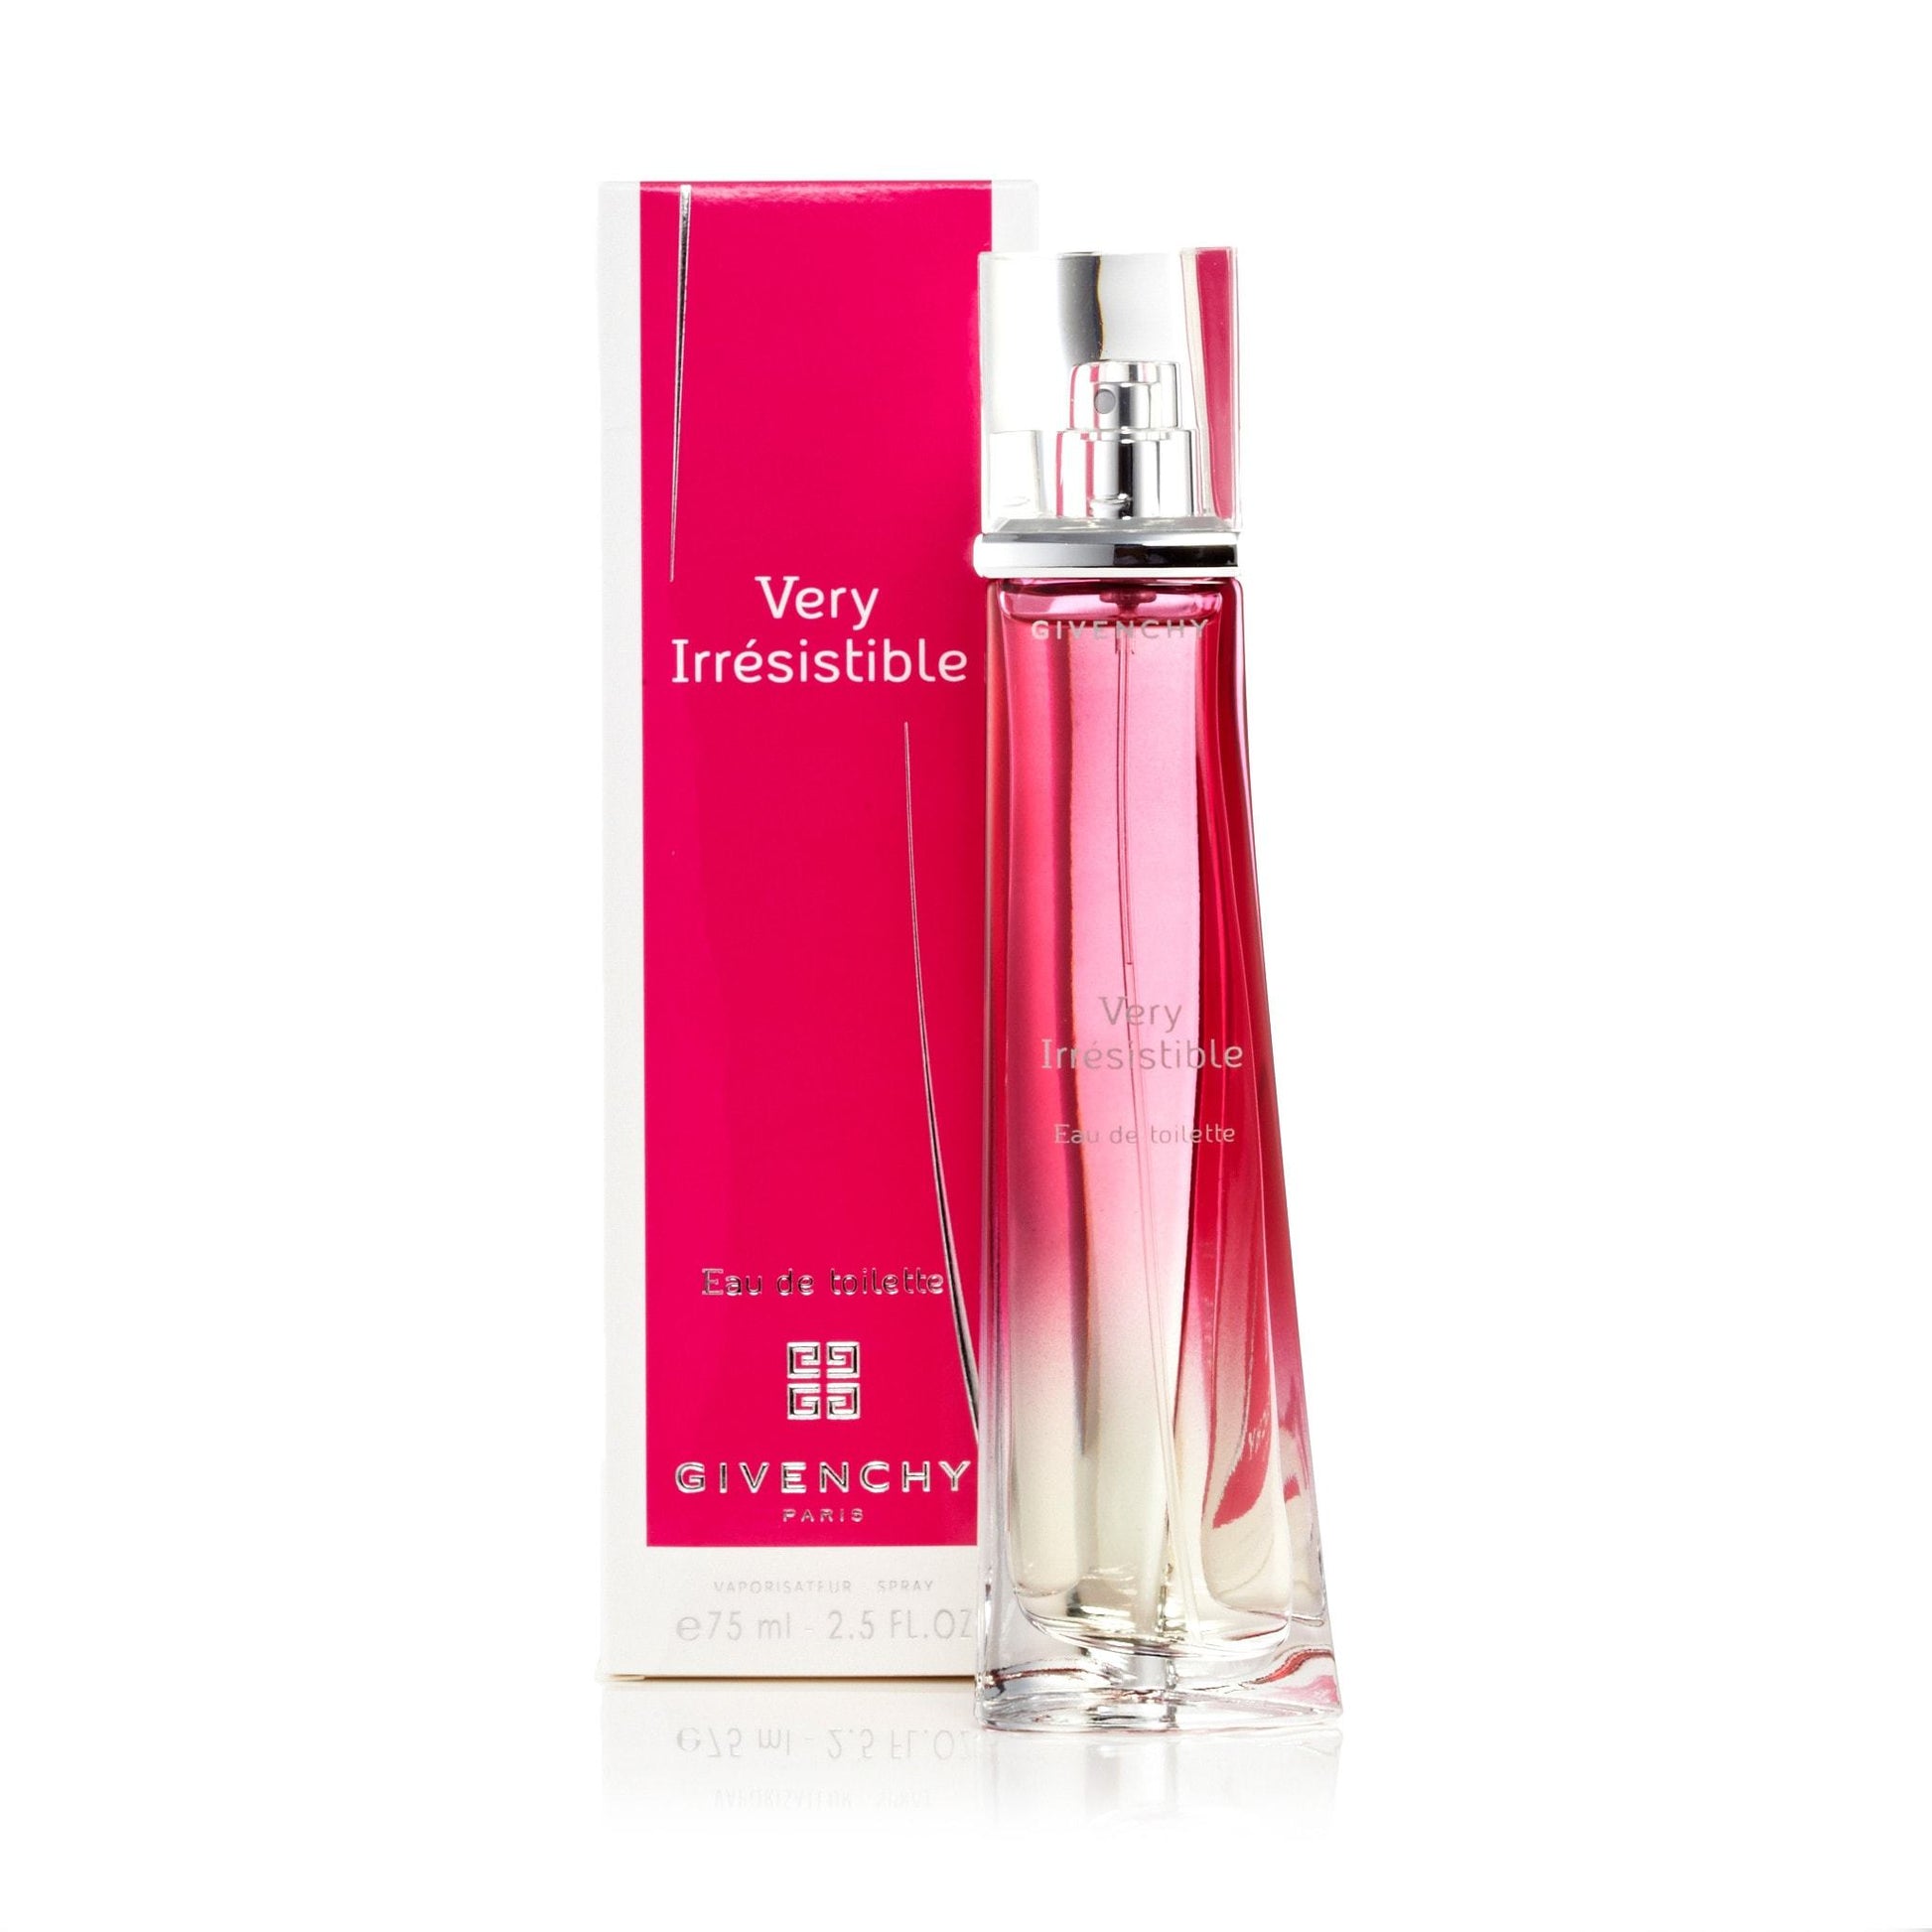 Very Irresistible Eau de Toilette Spray for Women by Givenchy, Product image 4